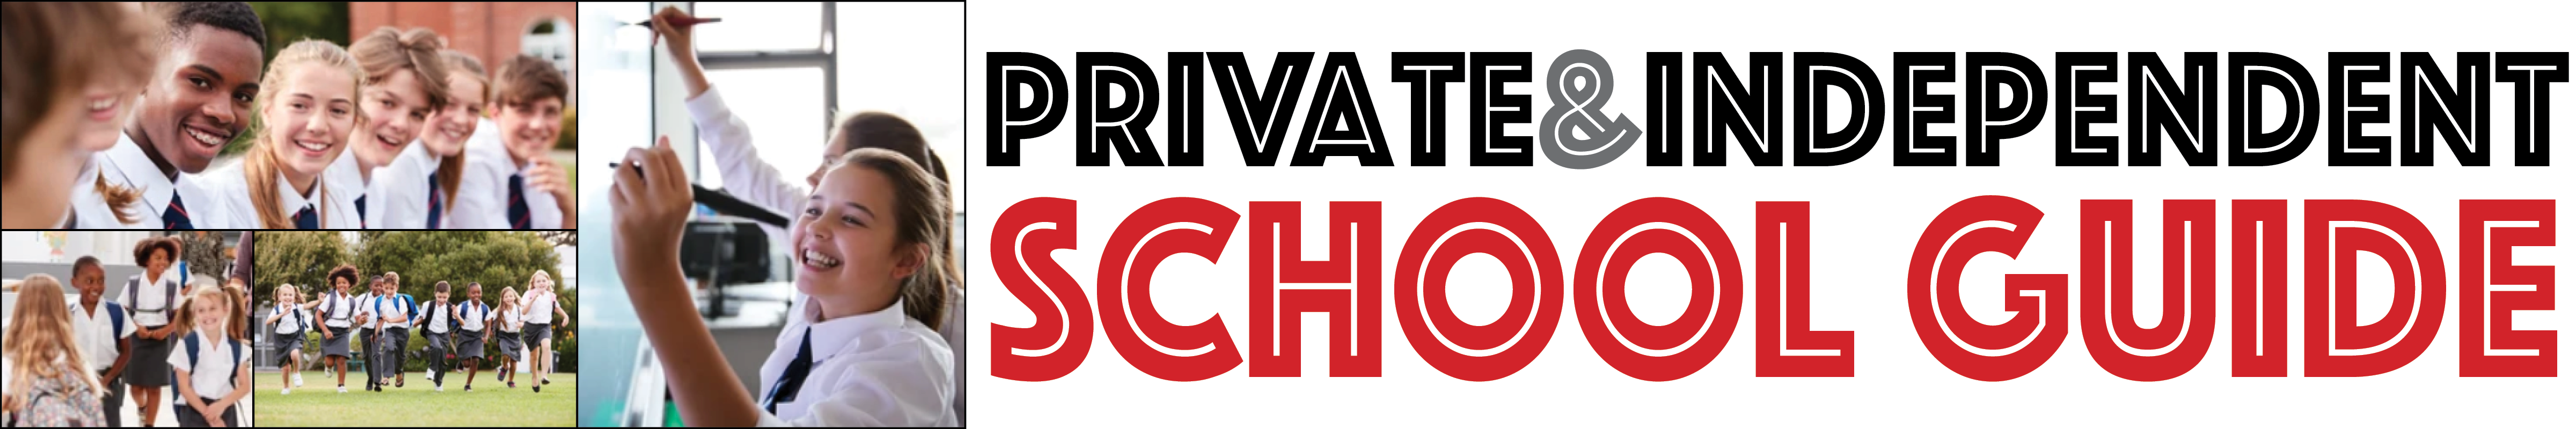 Private & Independent School Guide | Noozhawk